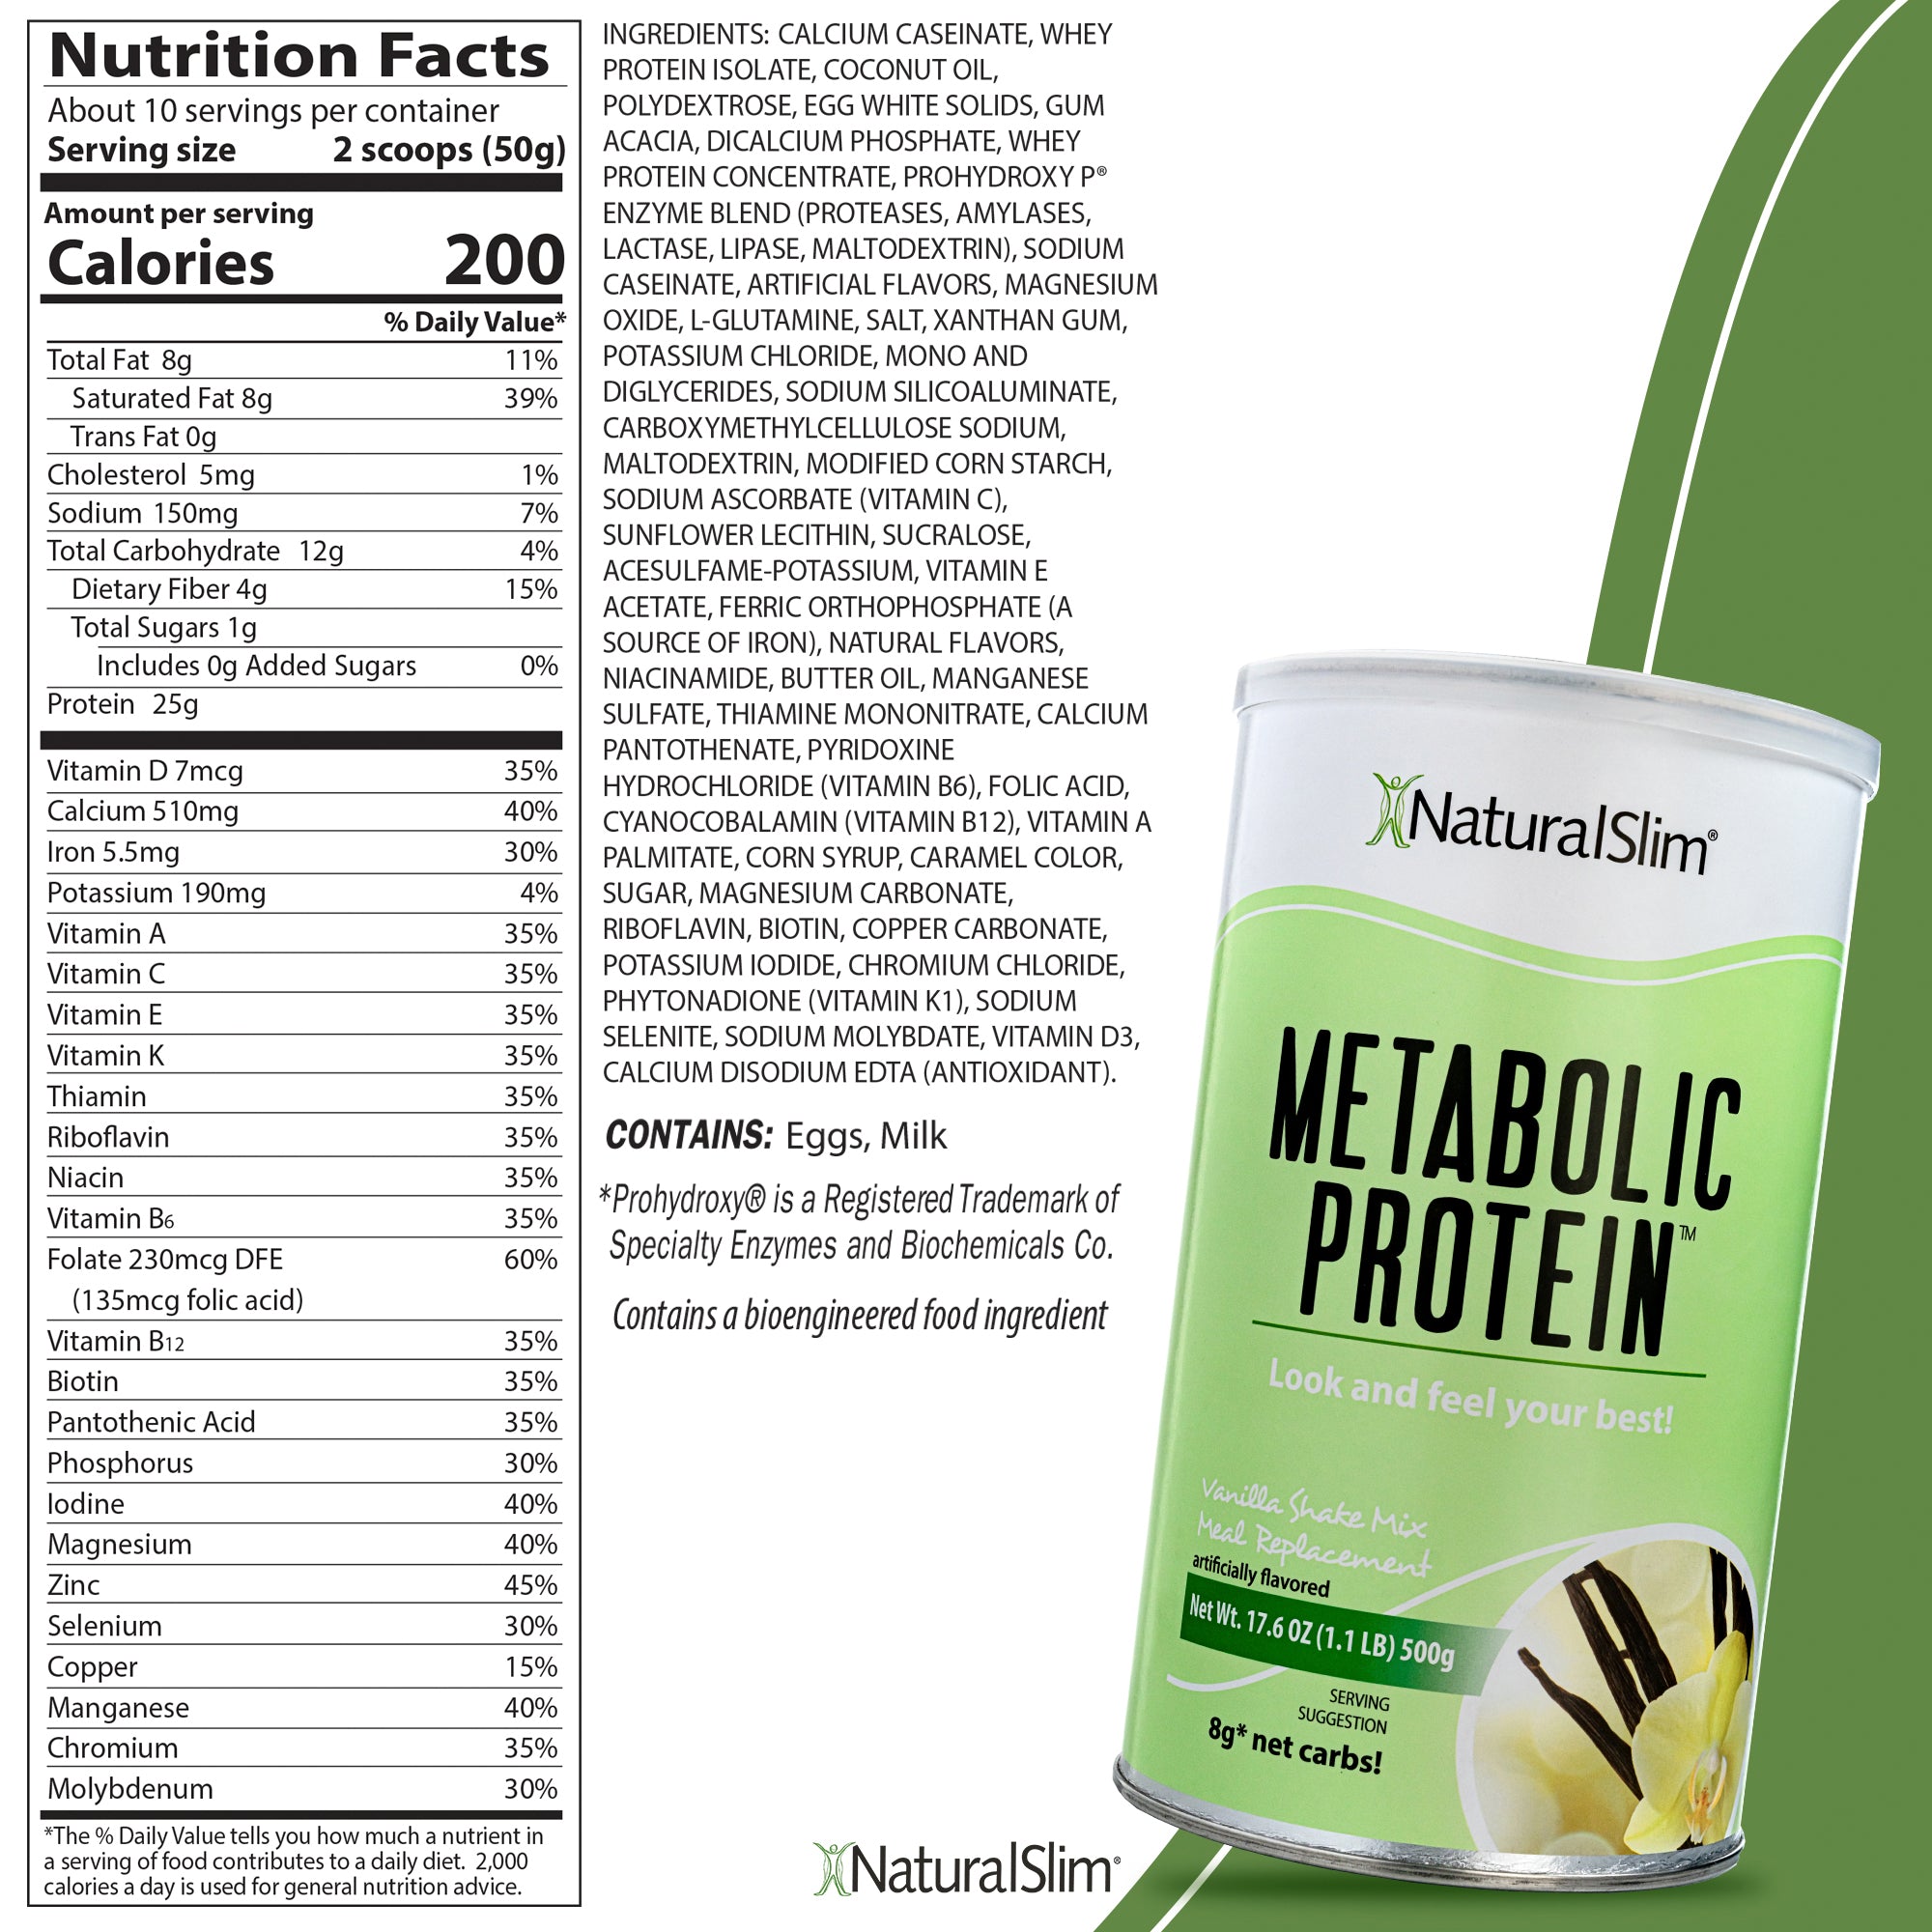 NaturalSlim Metabolic Whey Protein Powder – Chocolate Meal Replacement Shake,  10 Servings 